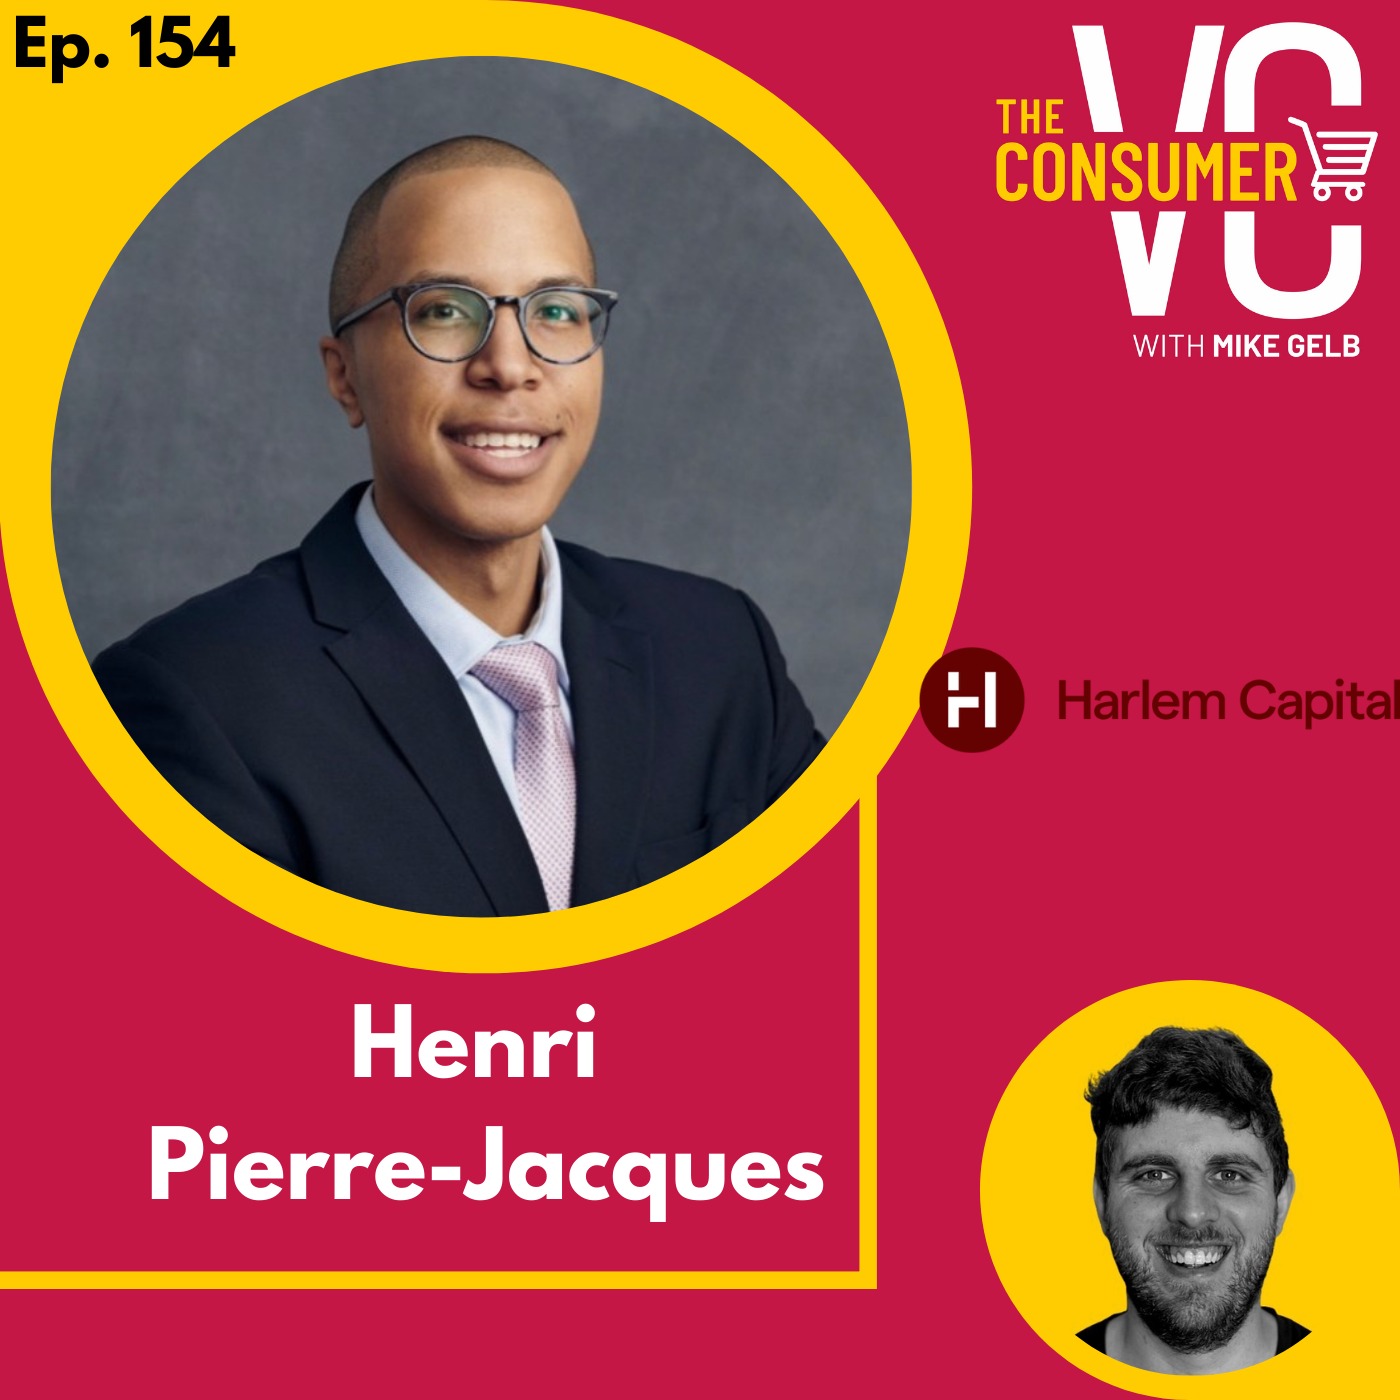 Henri Pierre-Jacques (Harlem Capital) - His mission to invest in 1,000 diverse founders over 20 years